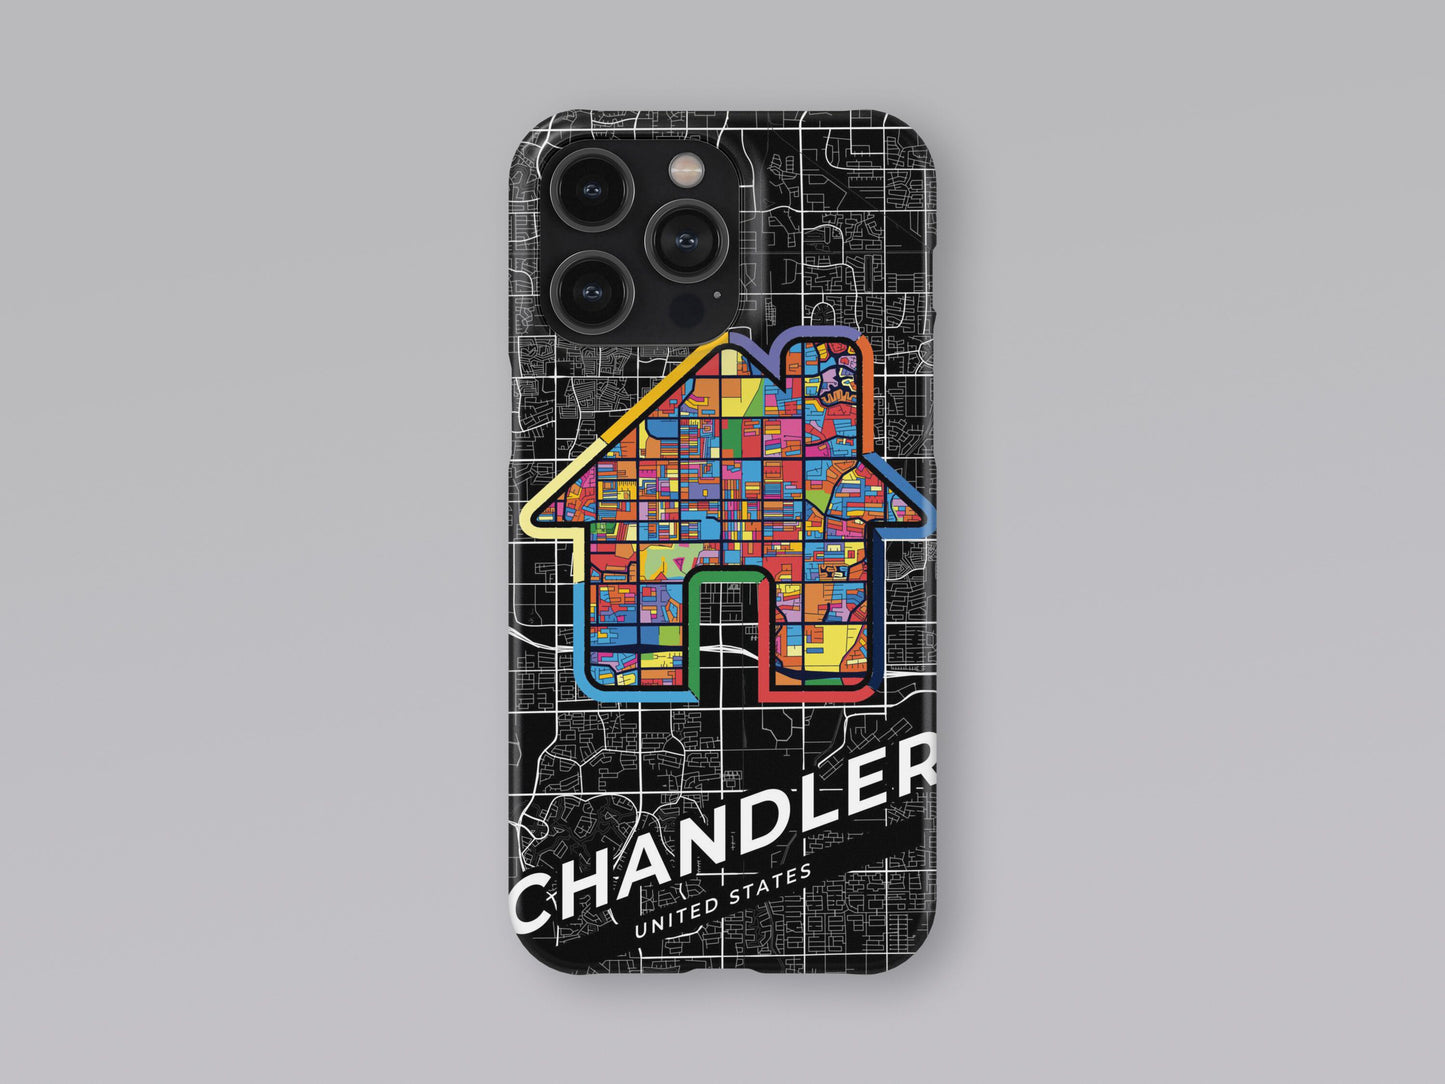 Chandler Arizona slim phone case with colorful icon. Birthday, wedding or housewarming gift. Couple match cases. 3